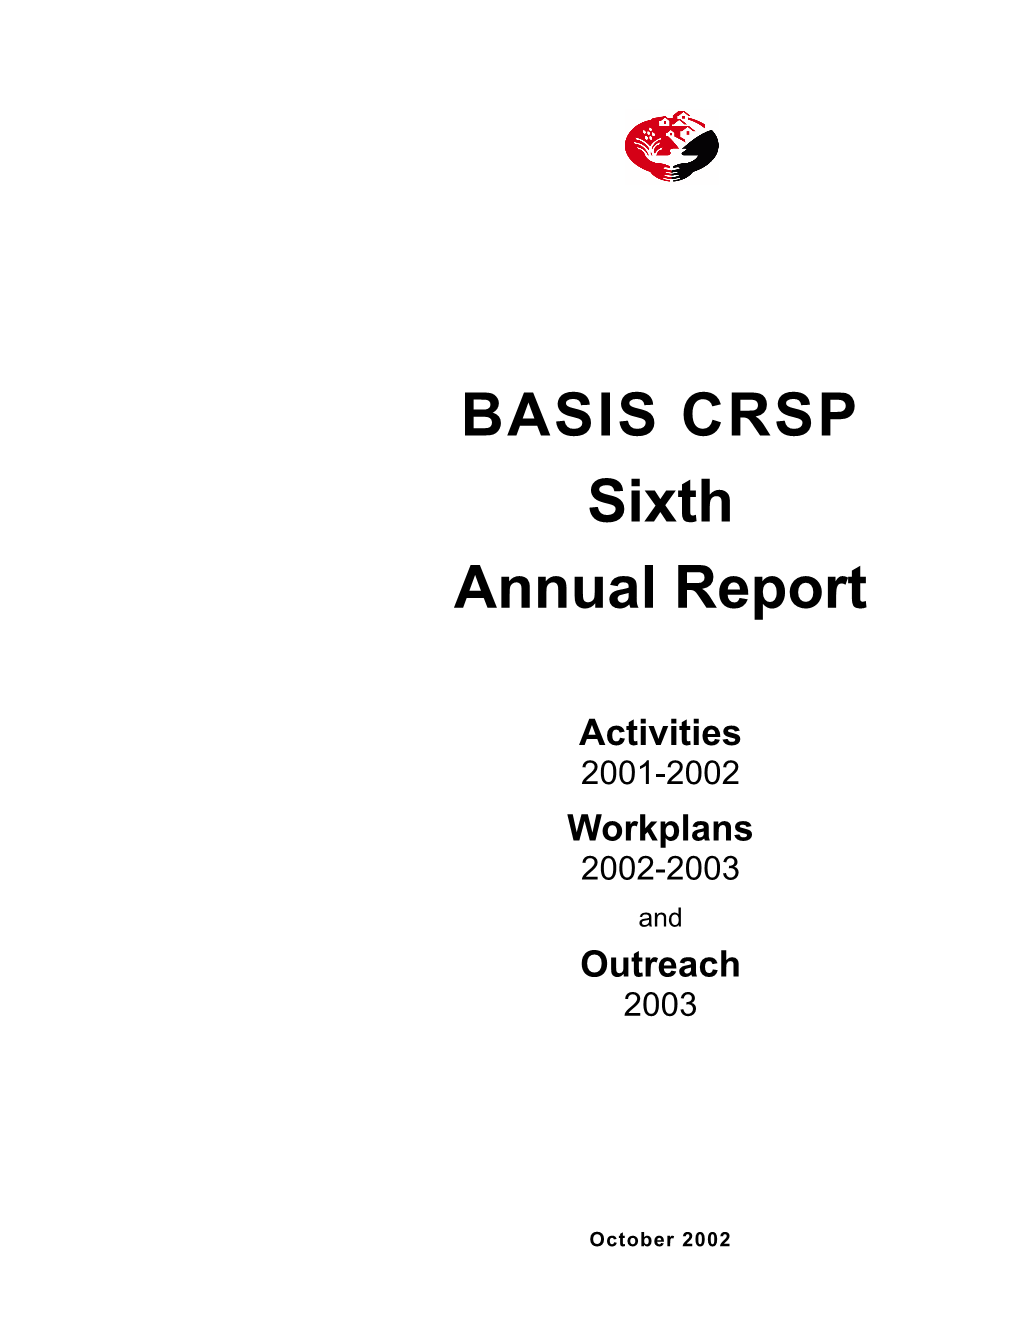 BASIS CRSP Sixth Annual Report